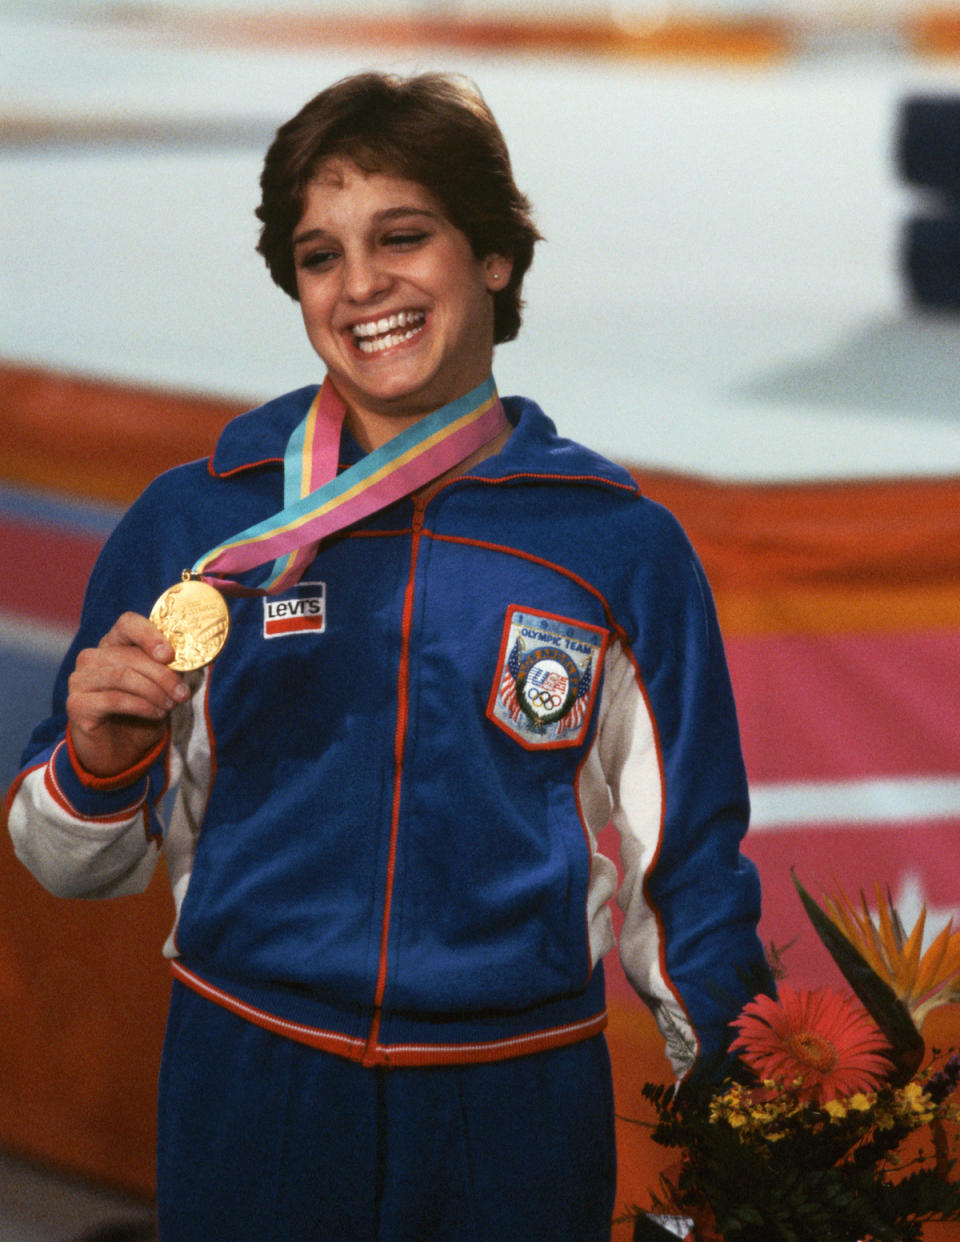 Mary Lou Retton with her gold medal in 1984